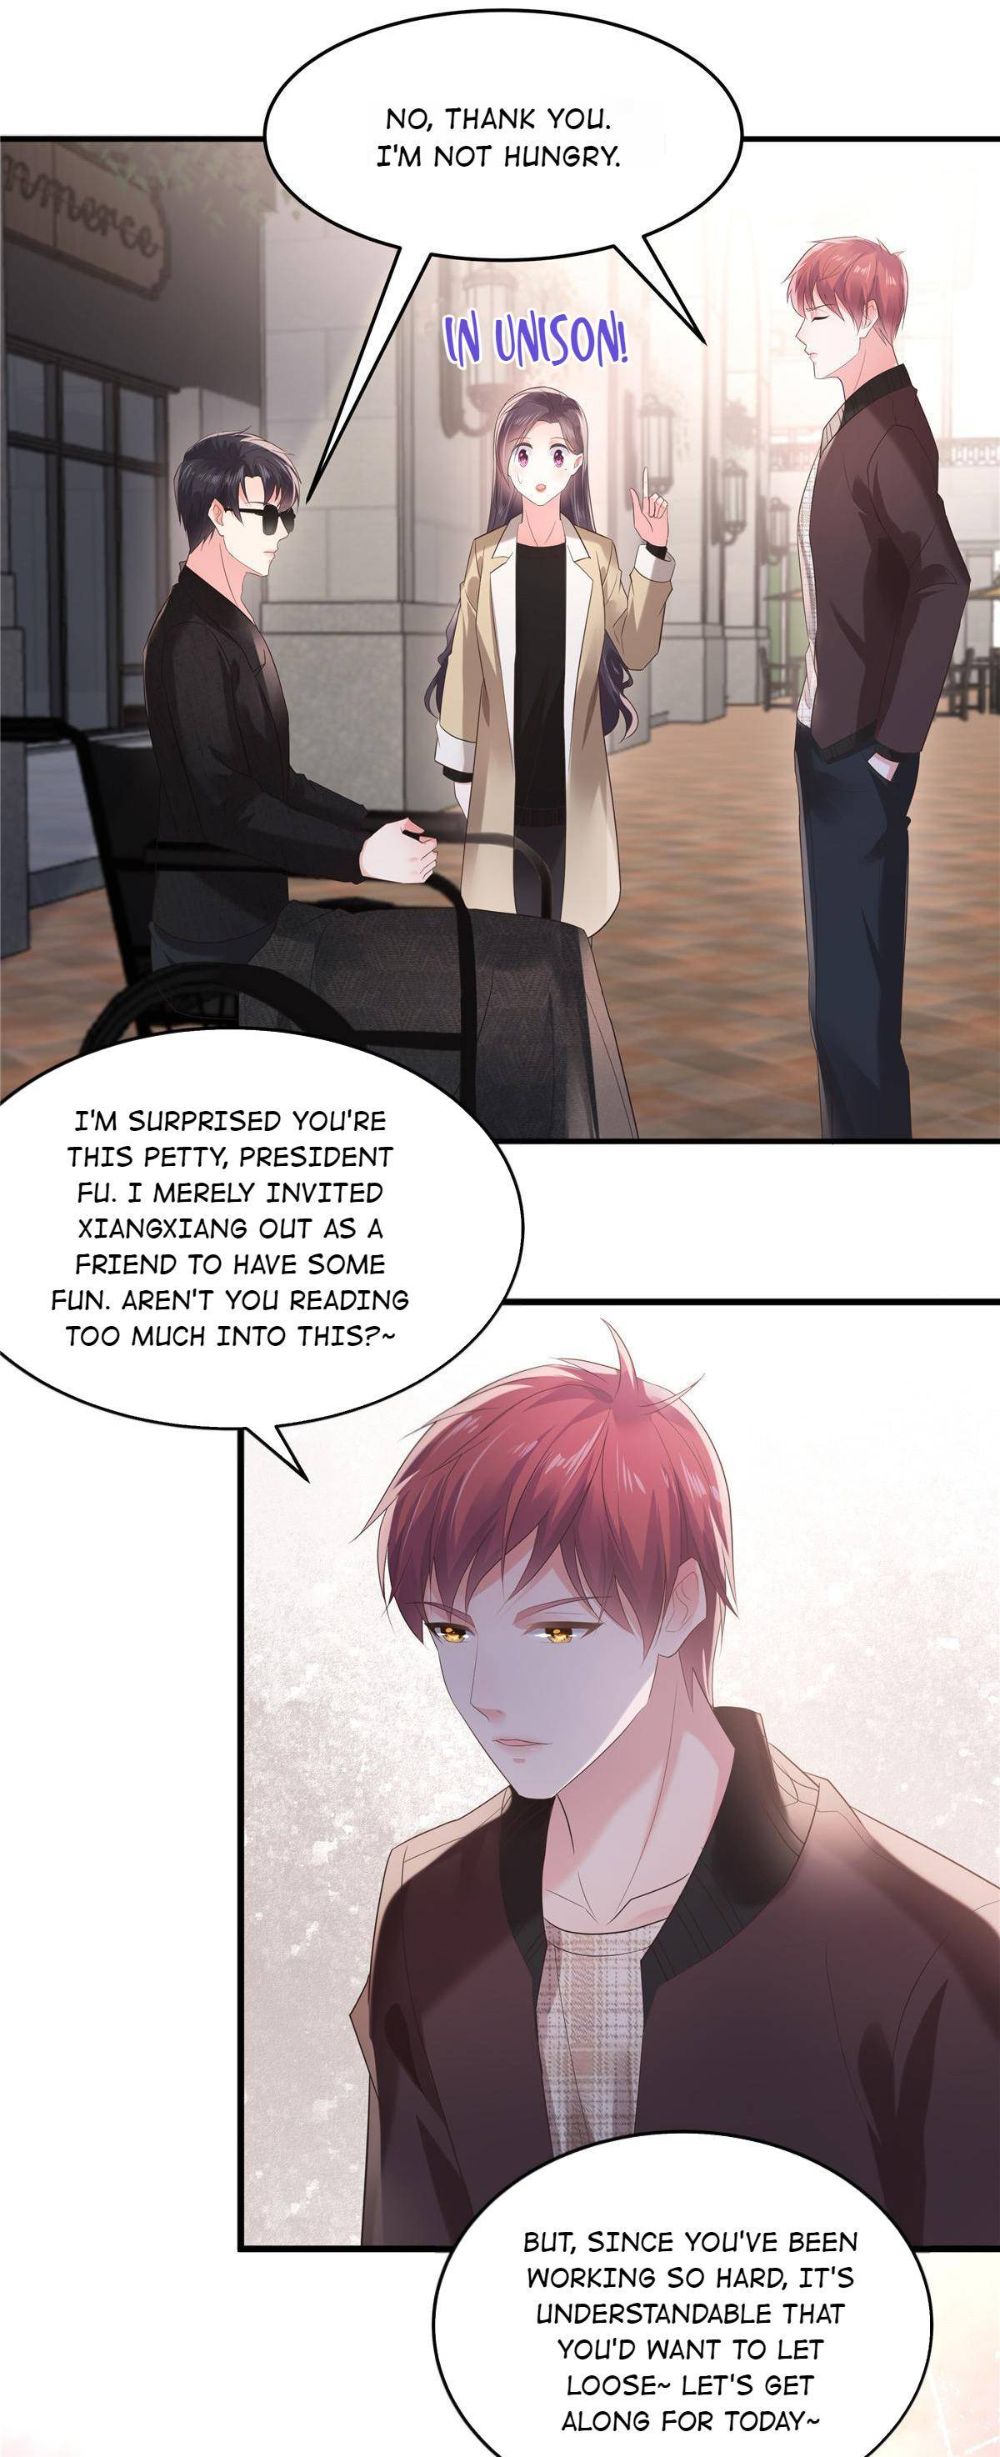 Rebirth Meeting: For You And My Exclusive Lovers - Page 2